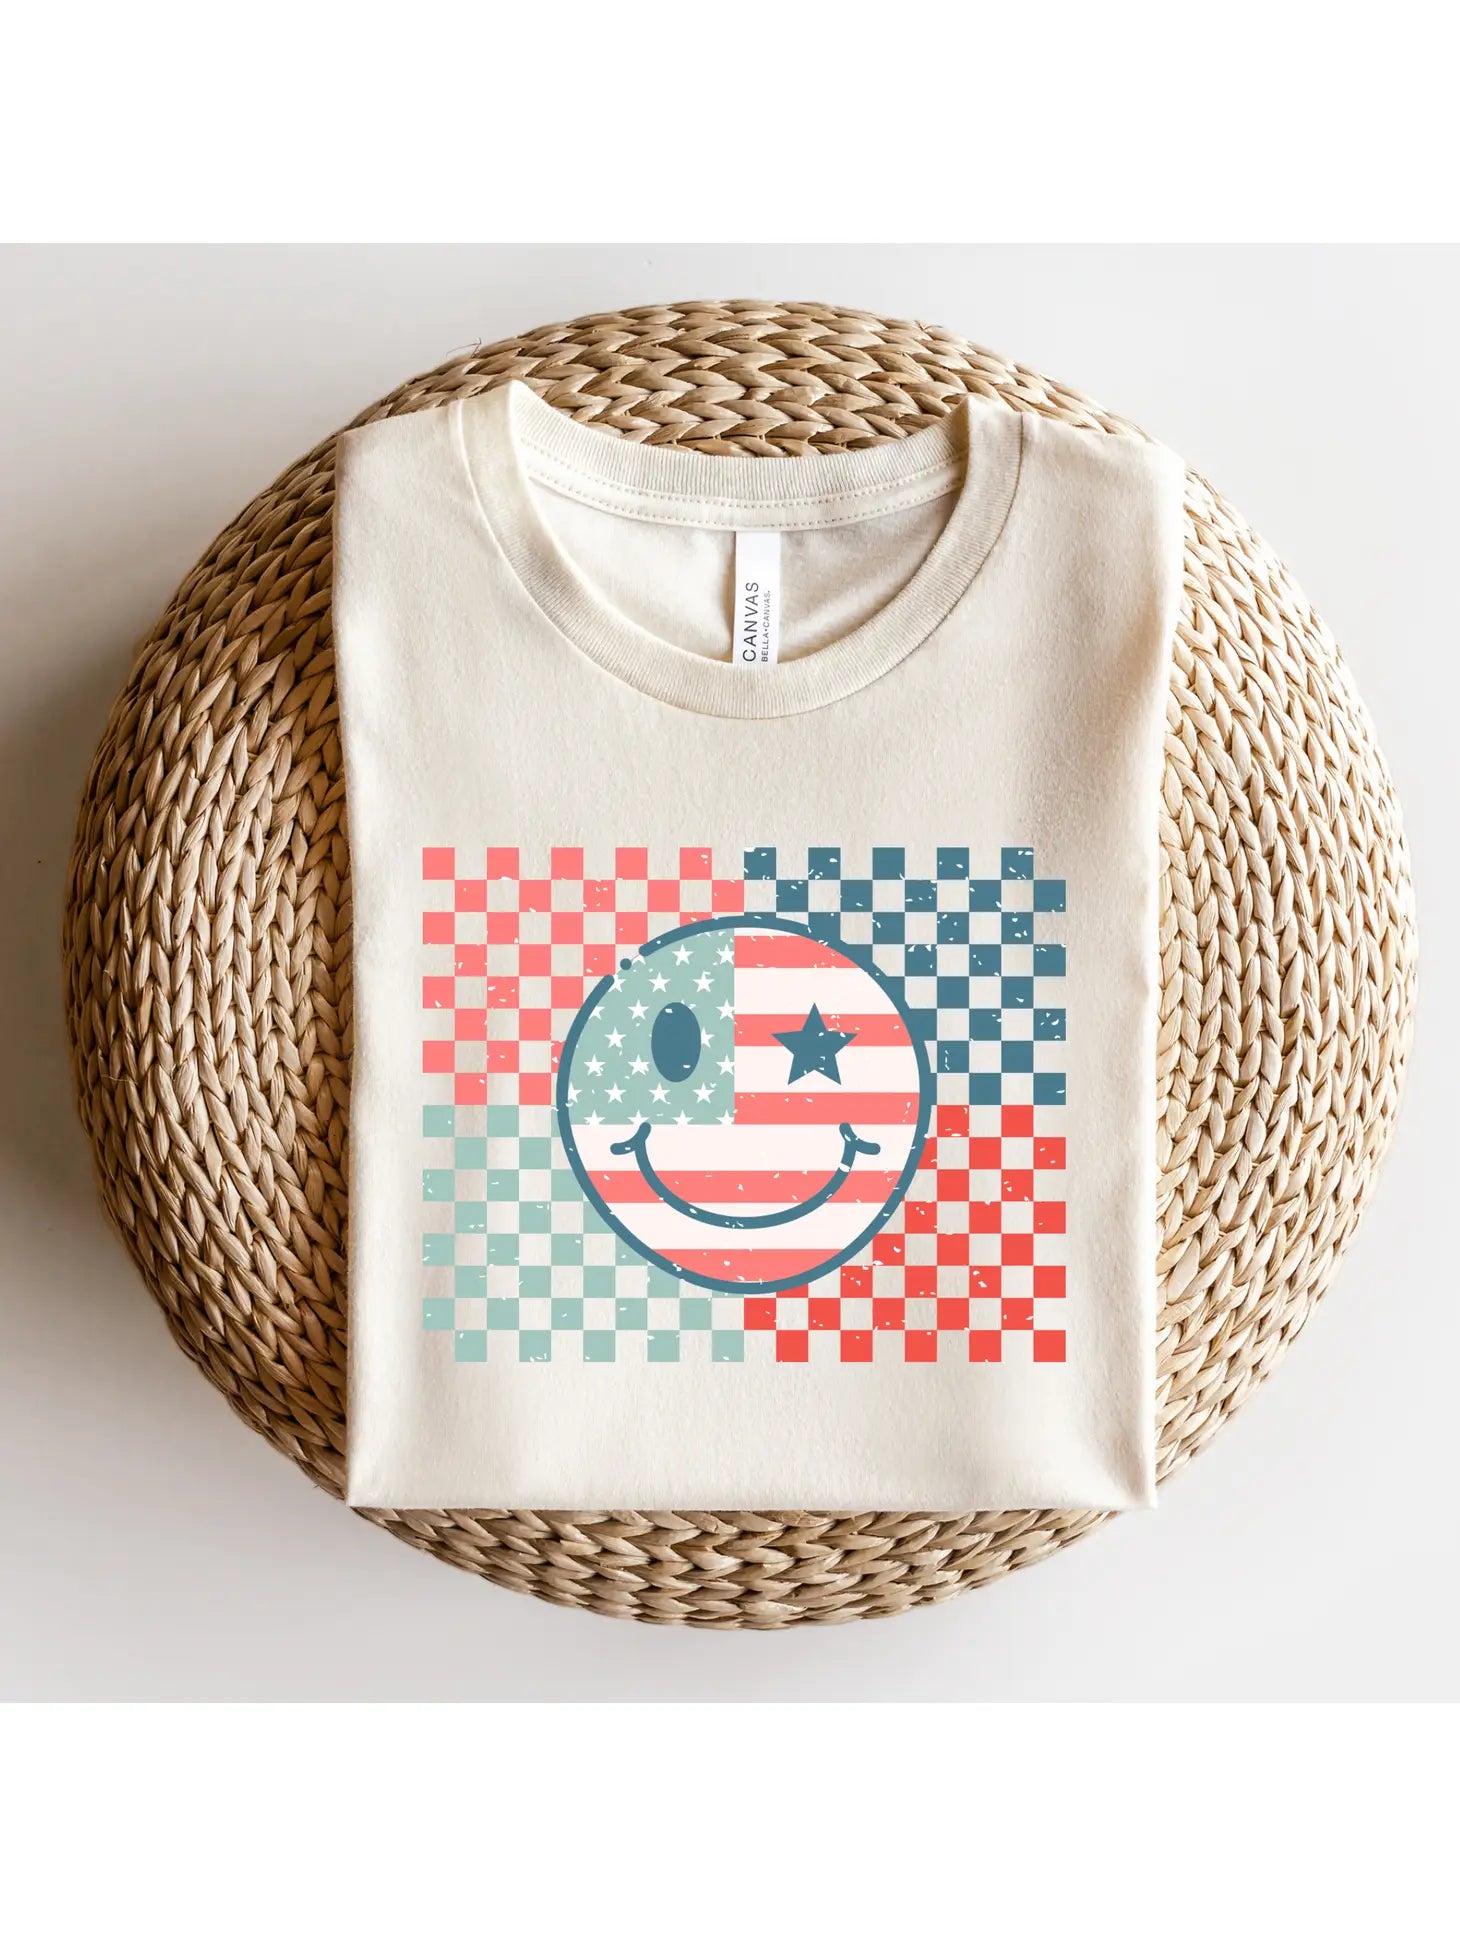 Multicolored Checkered Smiley Face 4th of July Graphic